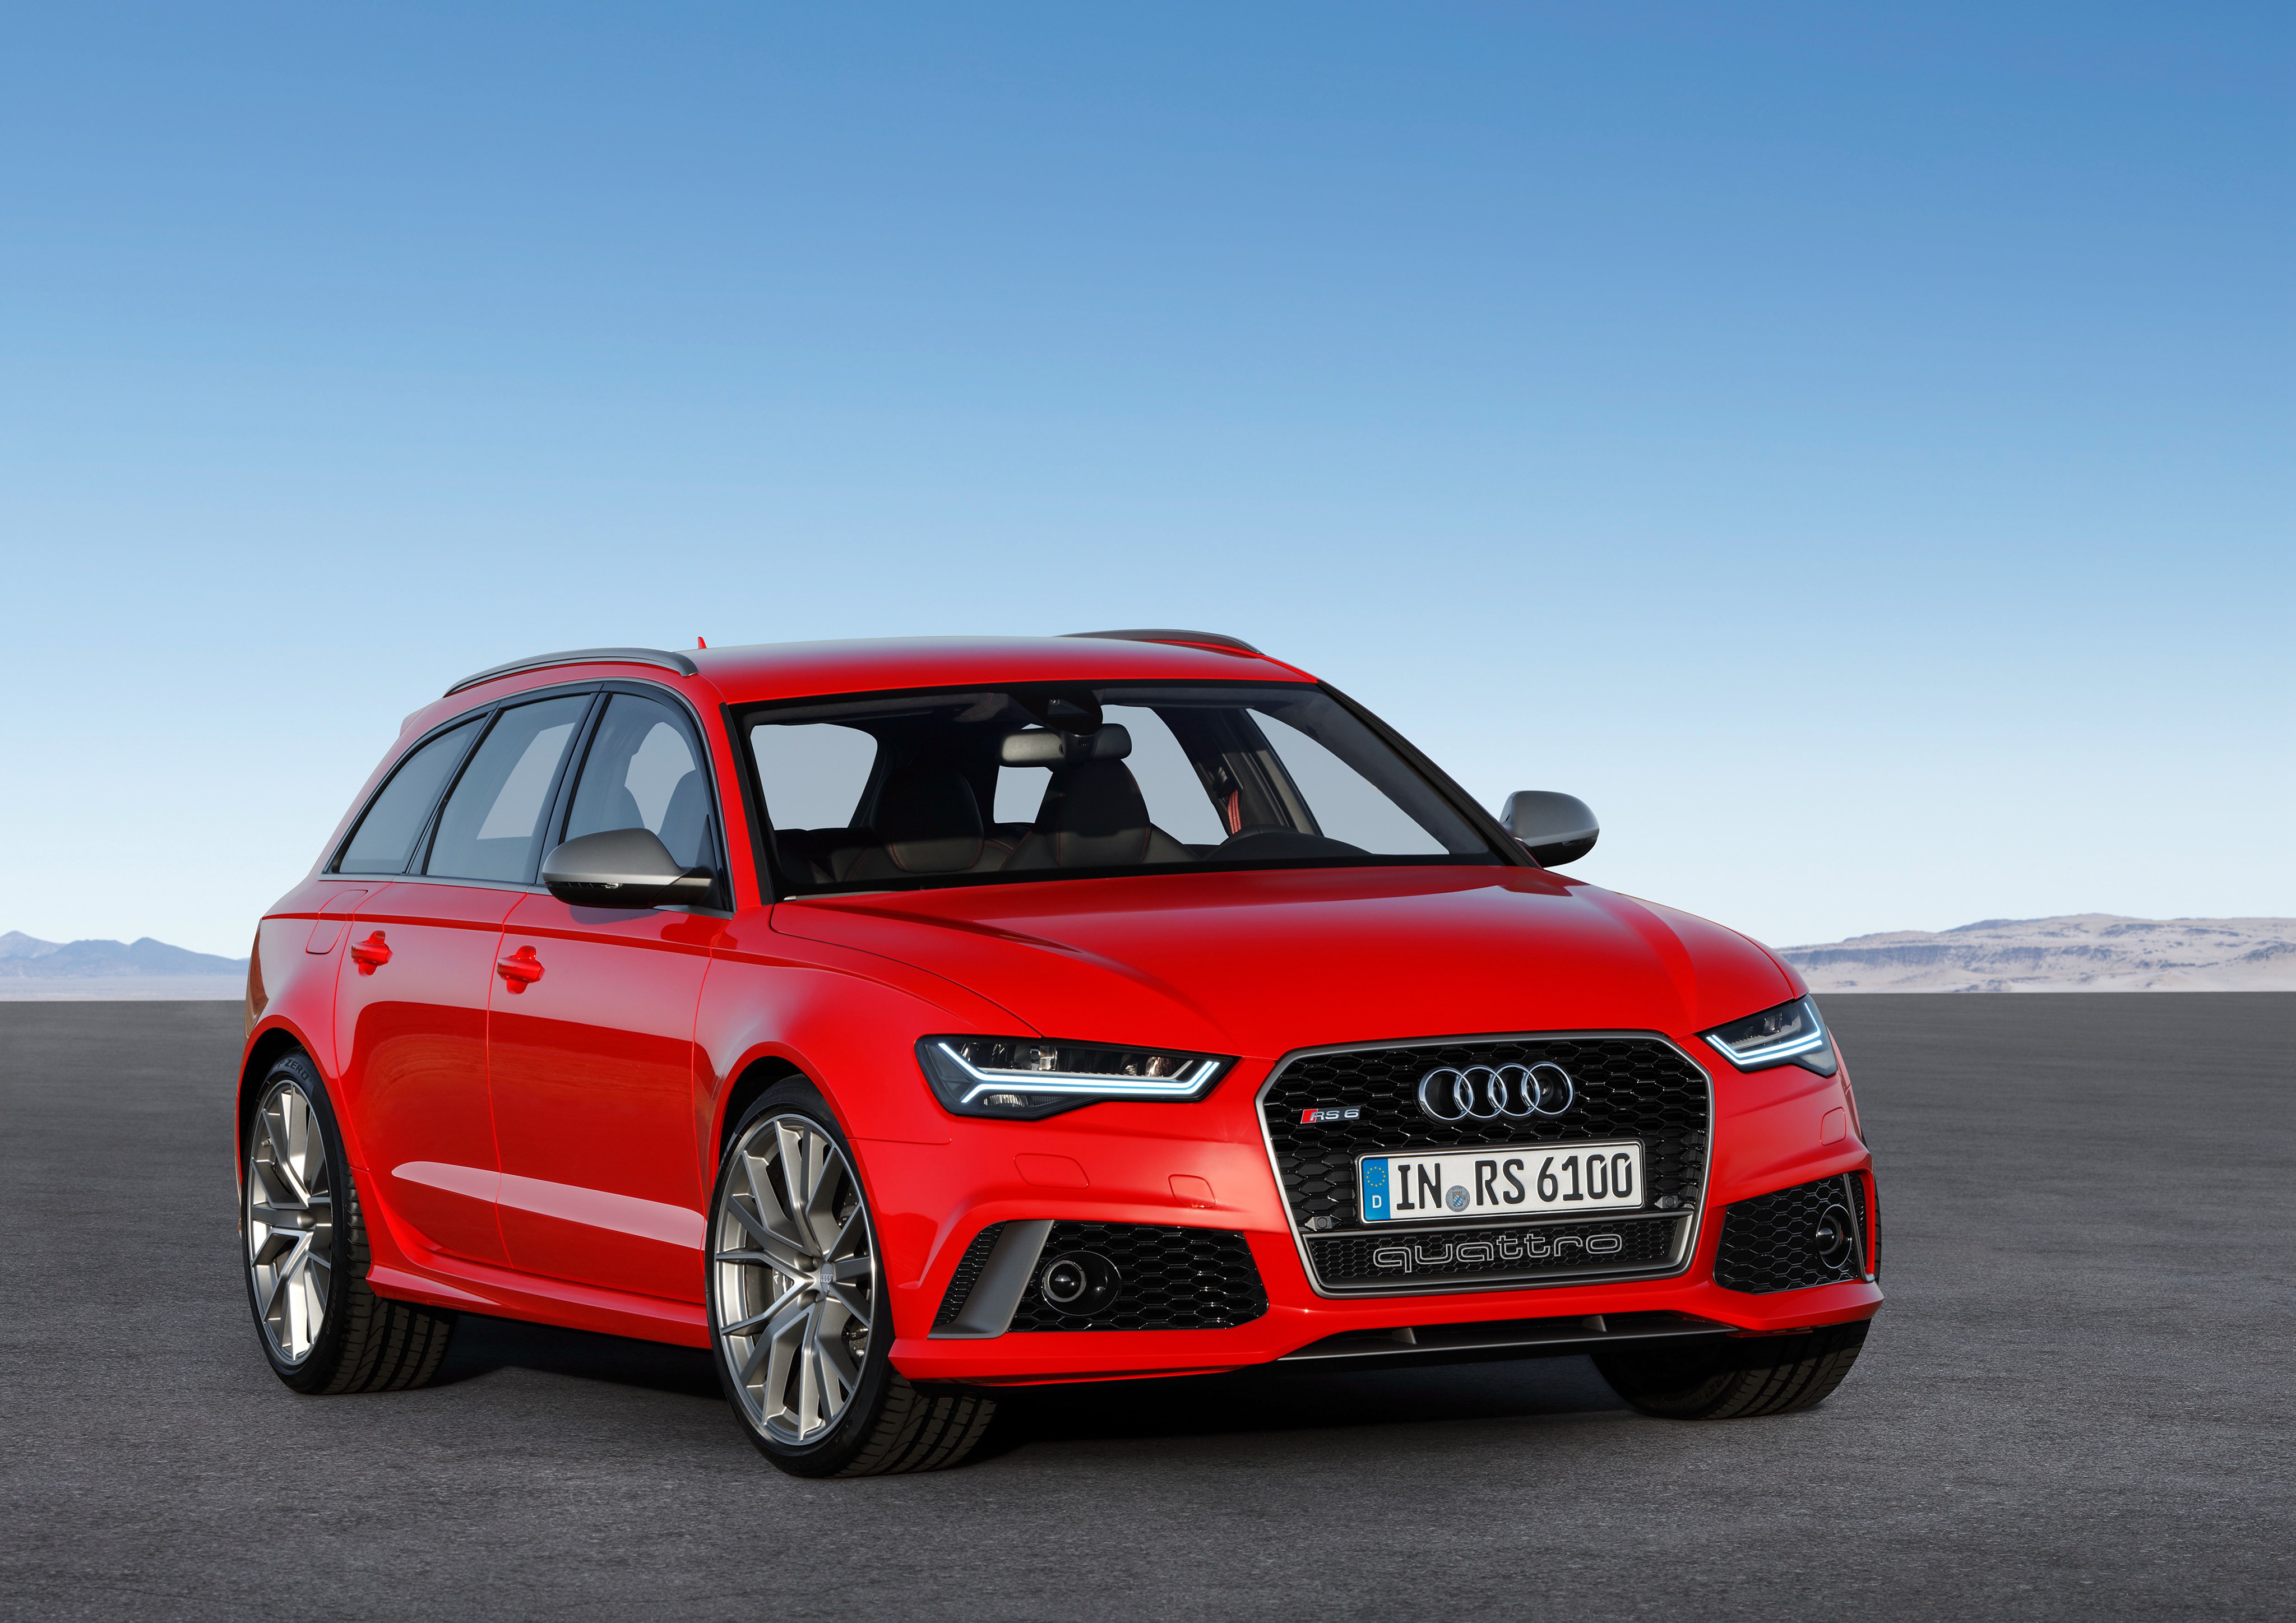 Audi Rs6 Avant Price In India , HD Wallpaper & Backgrounds